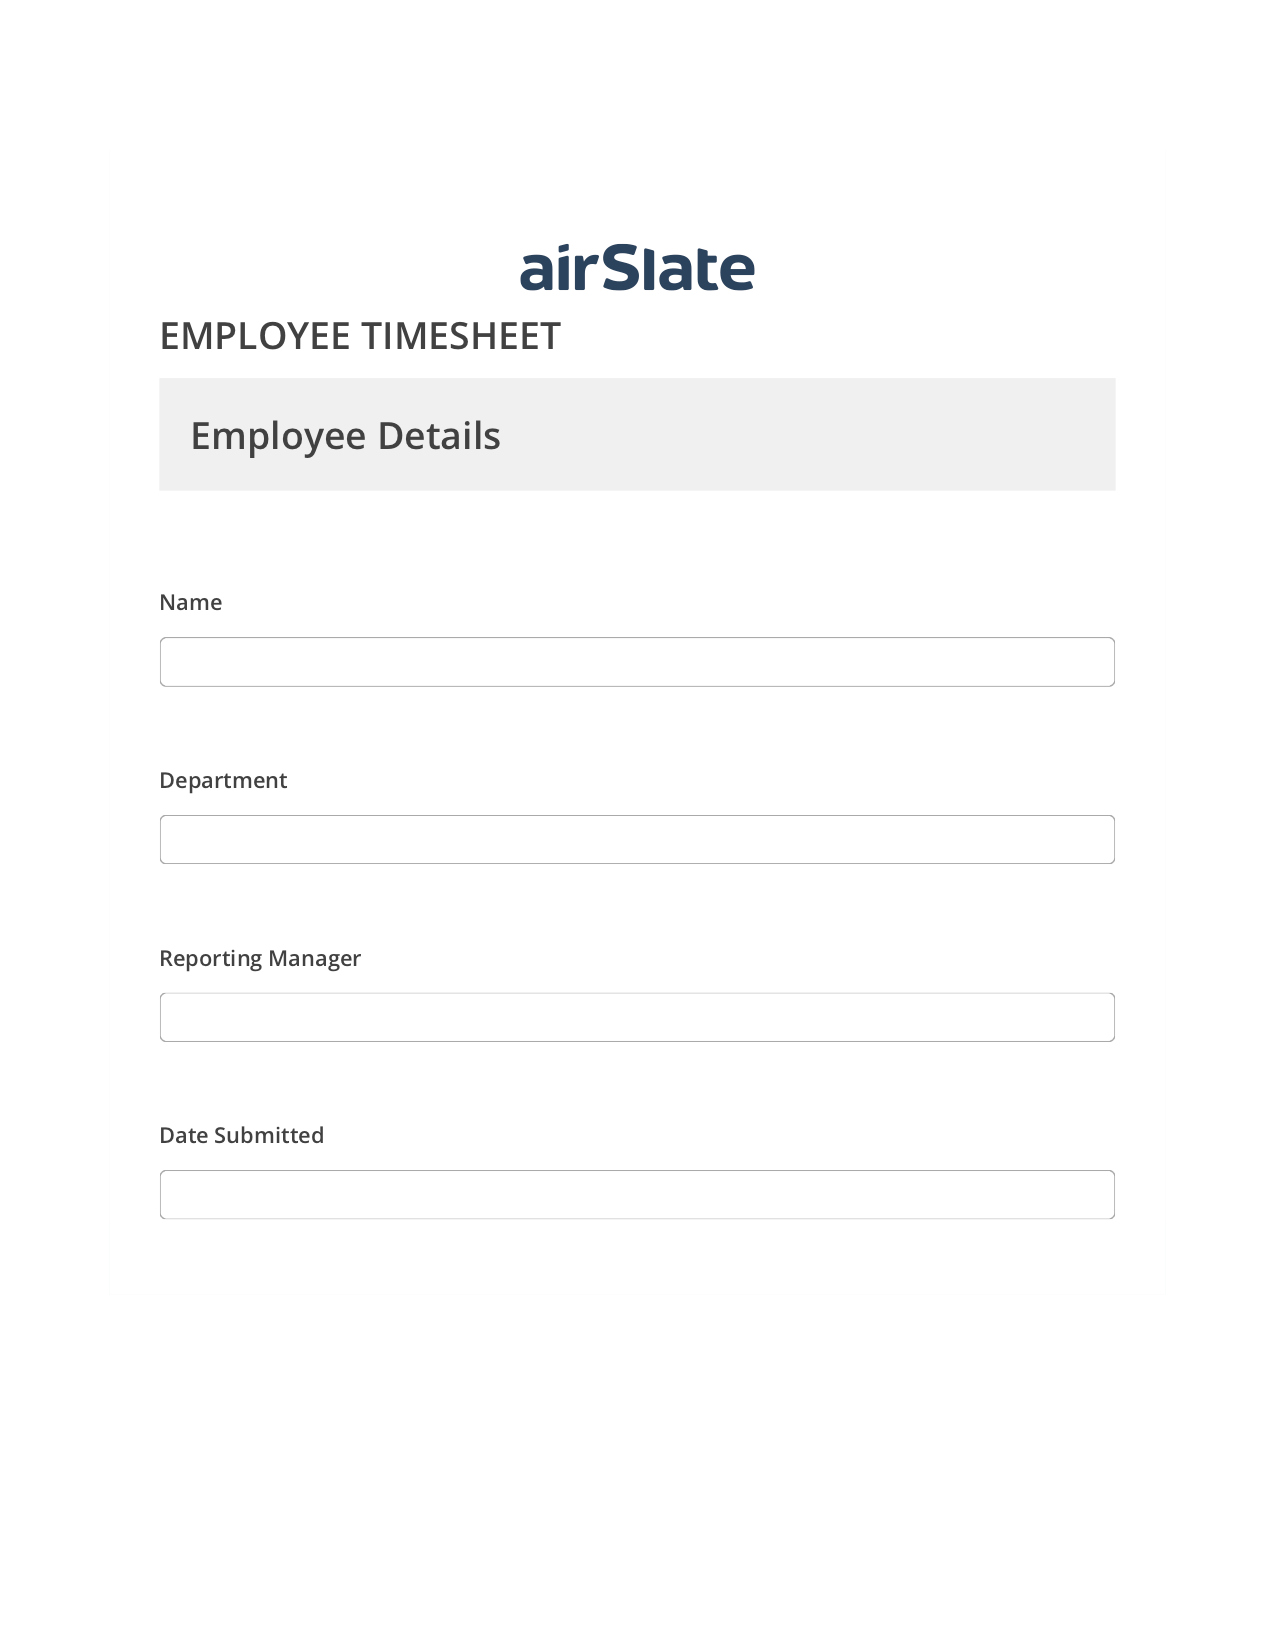 Employee Timesheet Workflow Pre-fill from NetSuite Records Bot, Export to MS Dynamics 365 Bot, Slack Two-Way Binding Bot